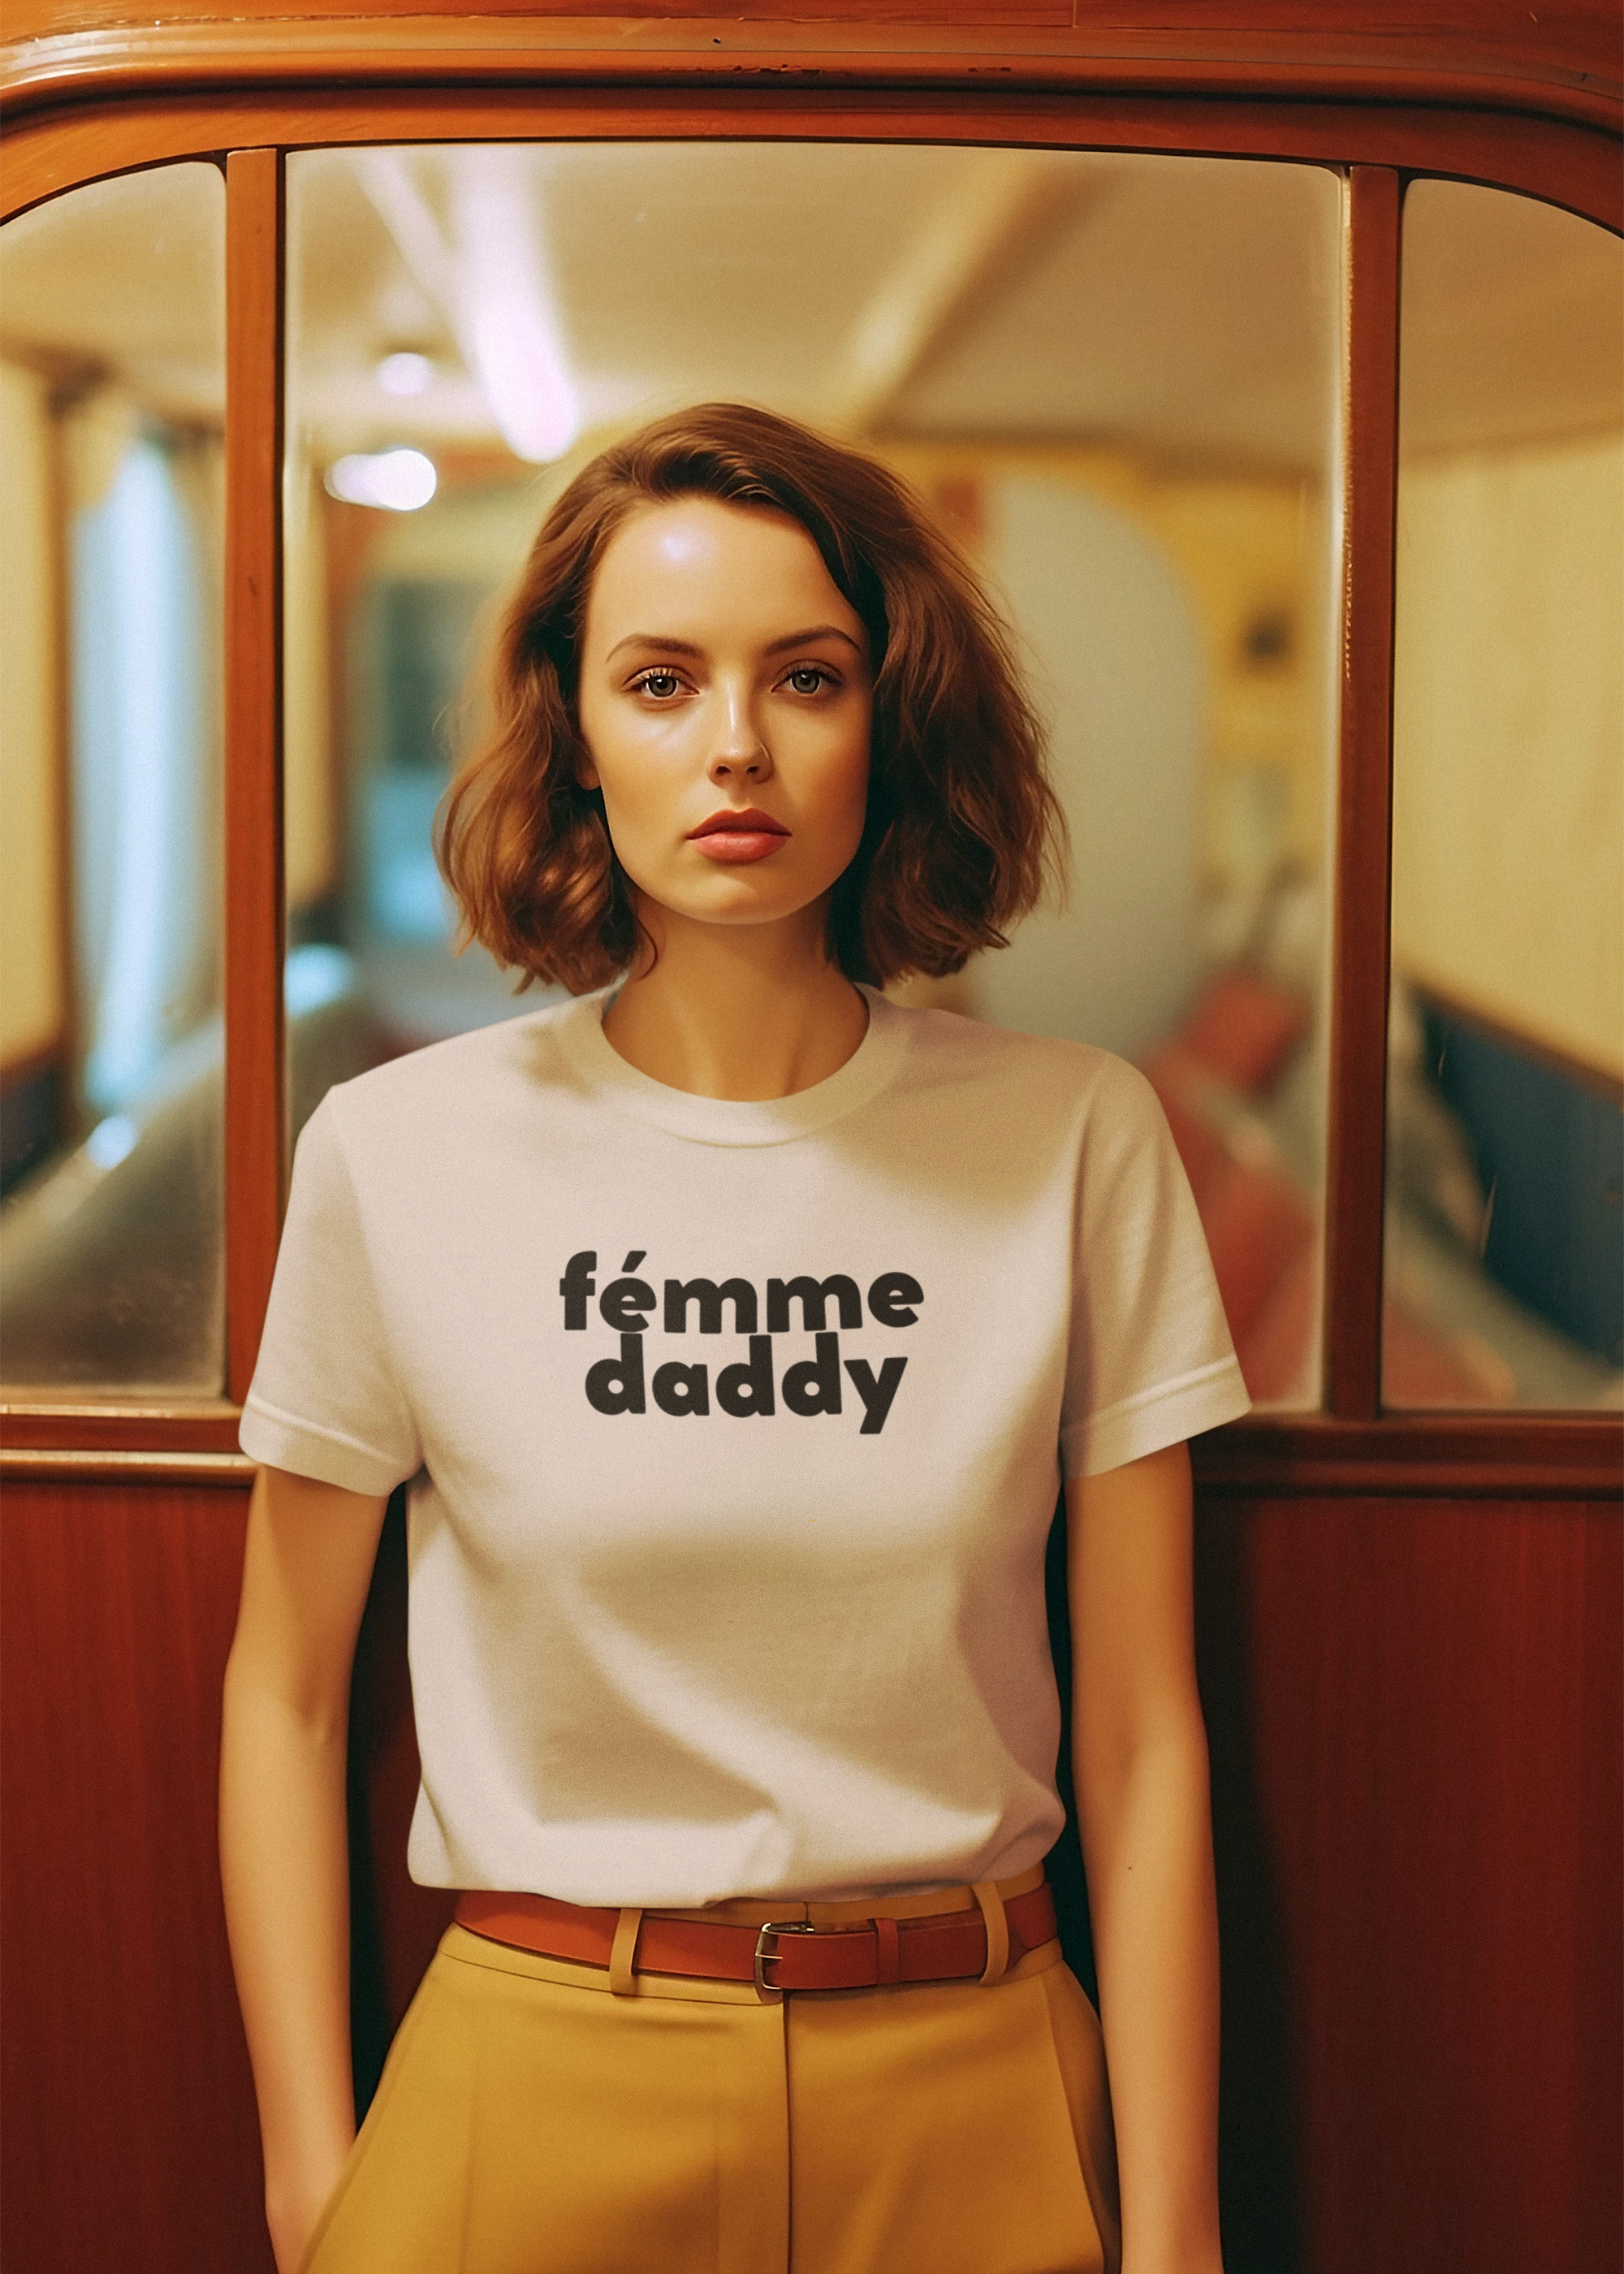 wes-anderson-inspired-t-shirt-mockup-of-a-woman-posing-on-a-train-m36439.png